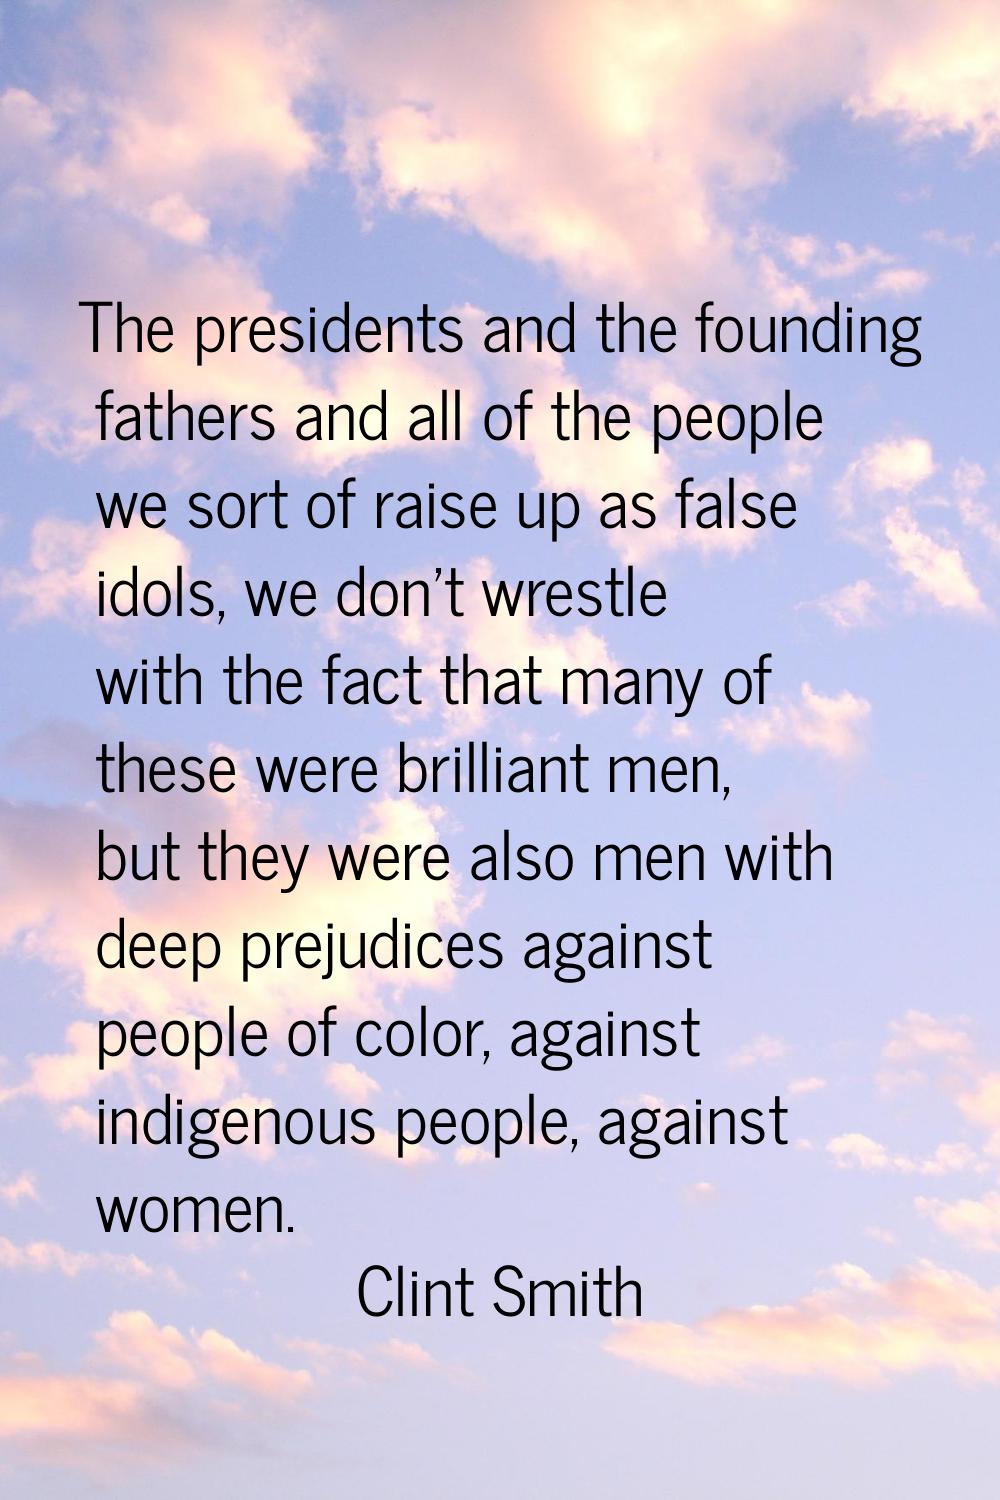 The presidents and the founding fathers and all of the people we sort of raise up as false idols, w